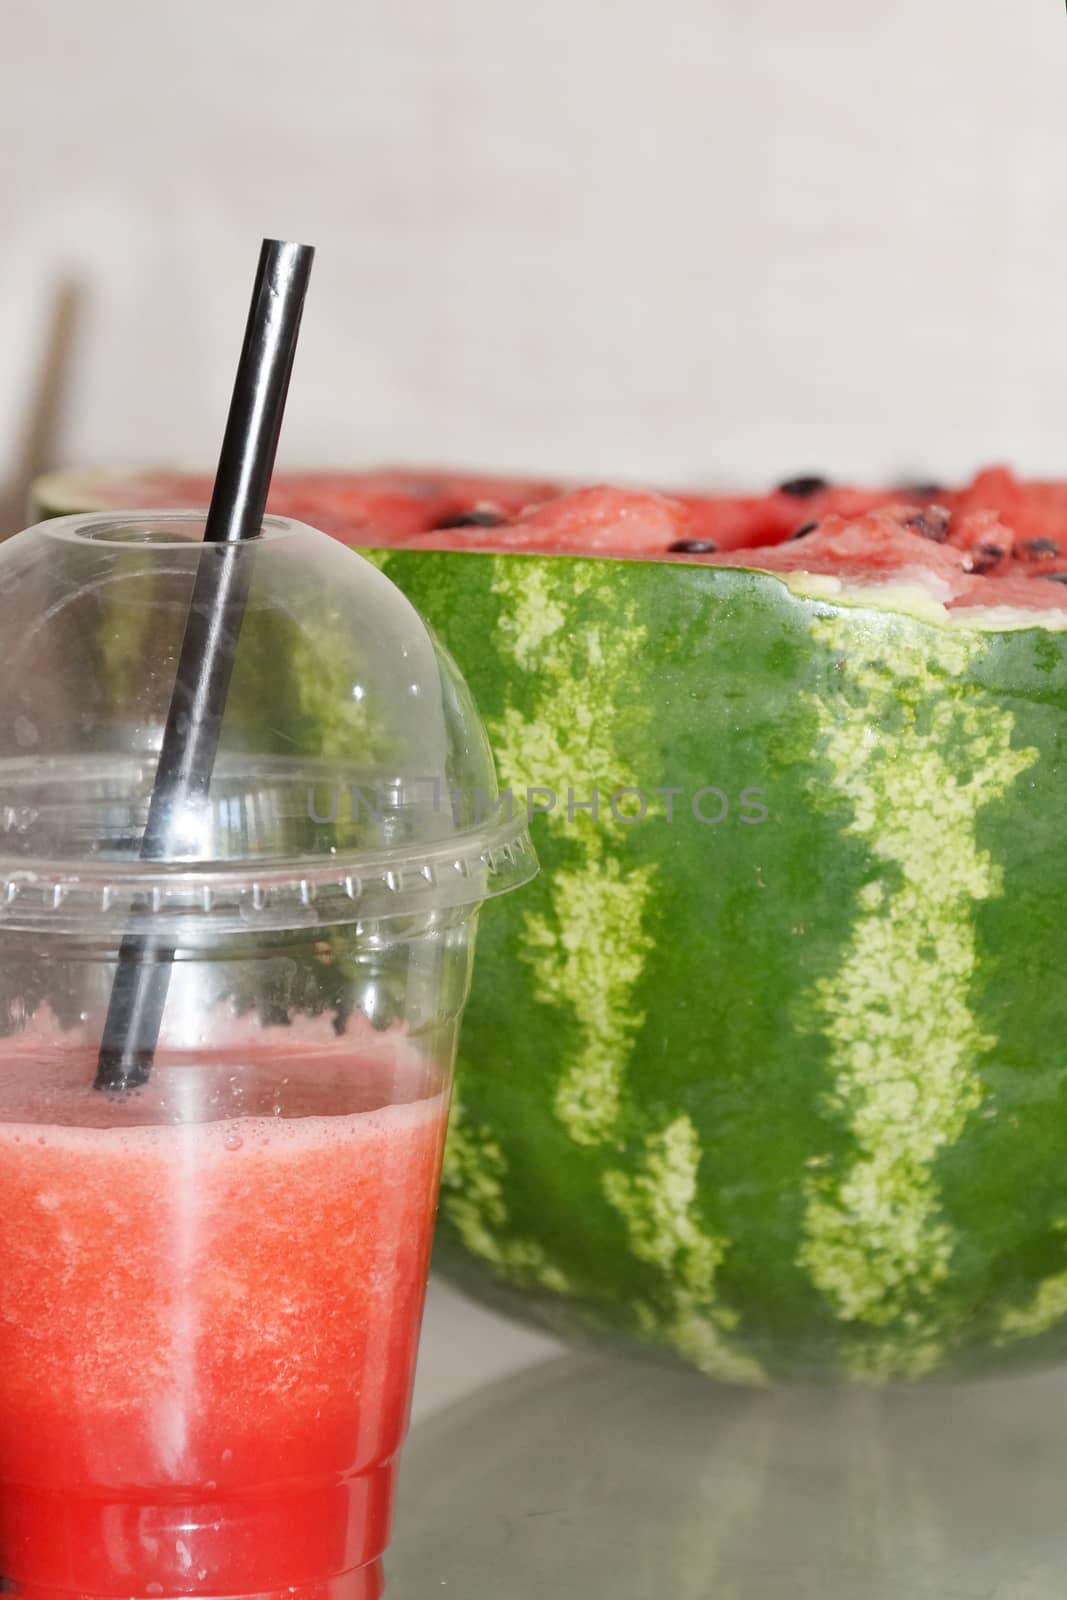 fresh watermelon in a glass with a straw and half a watermelon lose-up